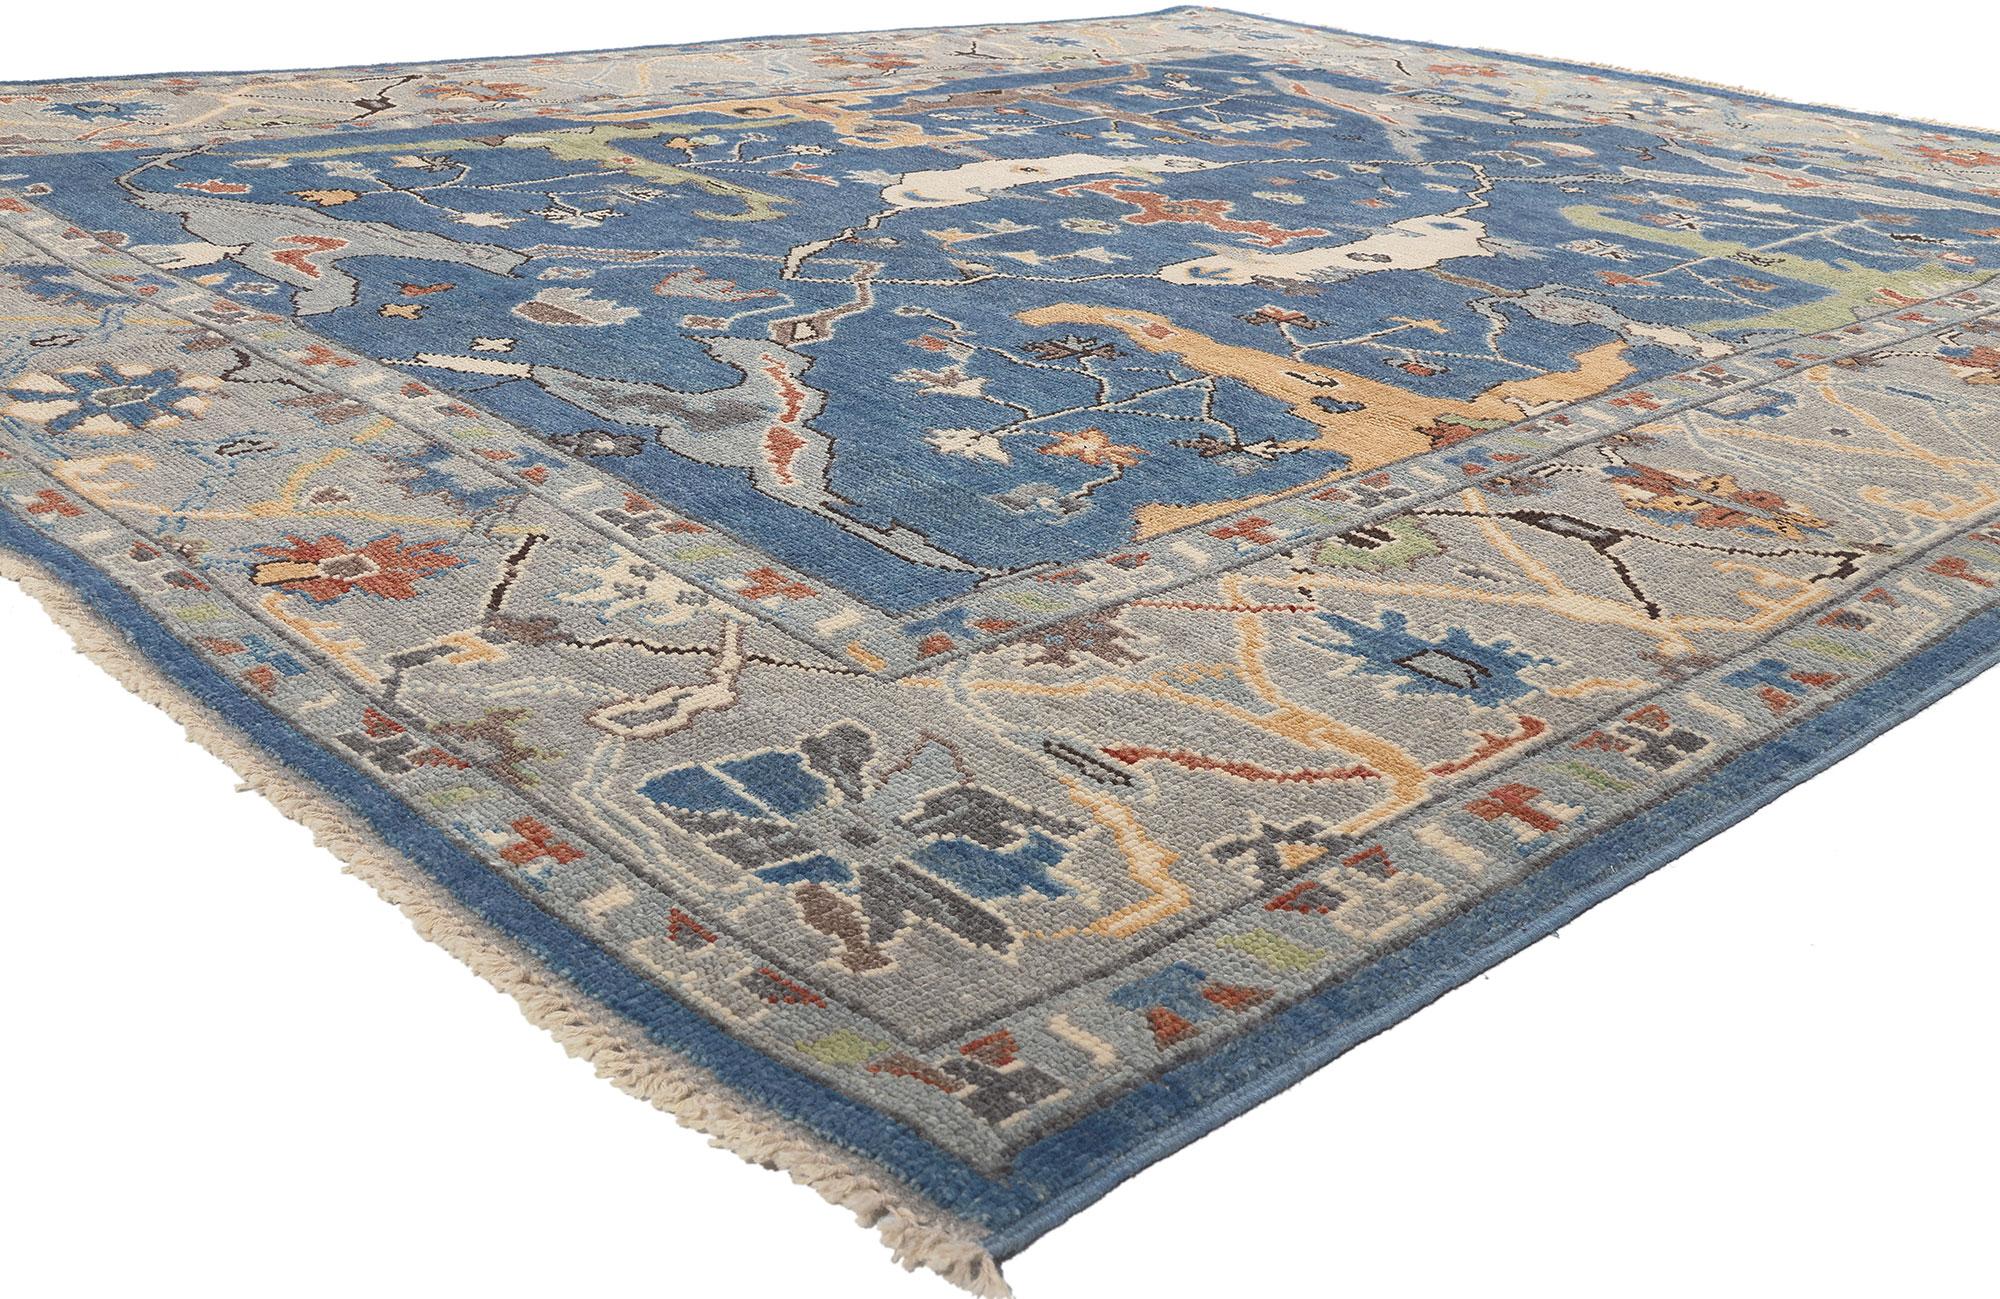 80990 New Colorful Blue Oushak Rug with Modern Style, 09'01 x 11'04. Emanating modern style with incredible detail and texture, this colorful blue Oushak rug is the answer to upscale design furnishings, whether generously or gingerly appointed. The